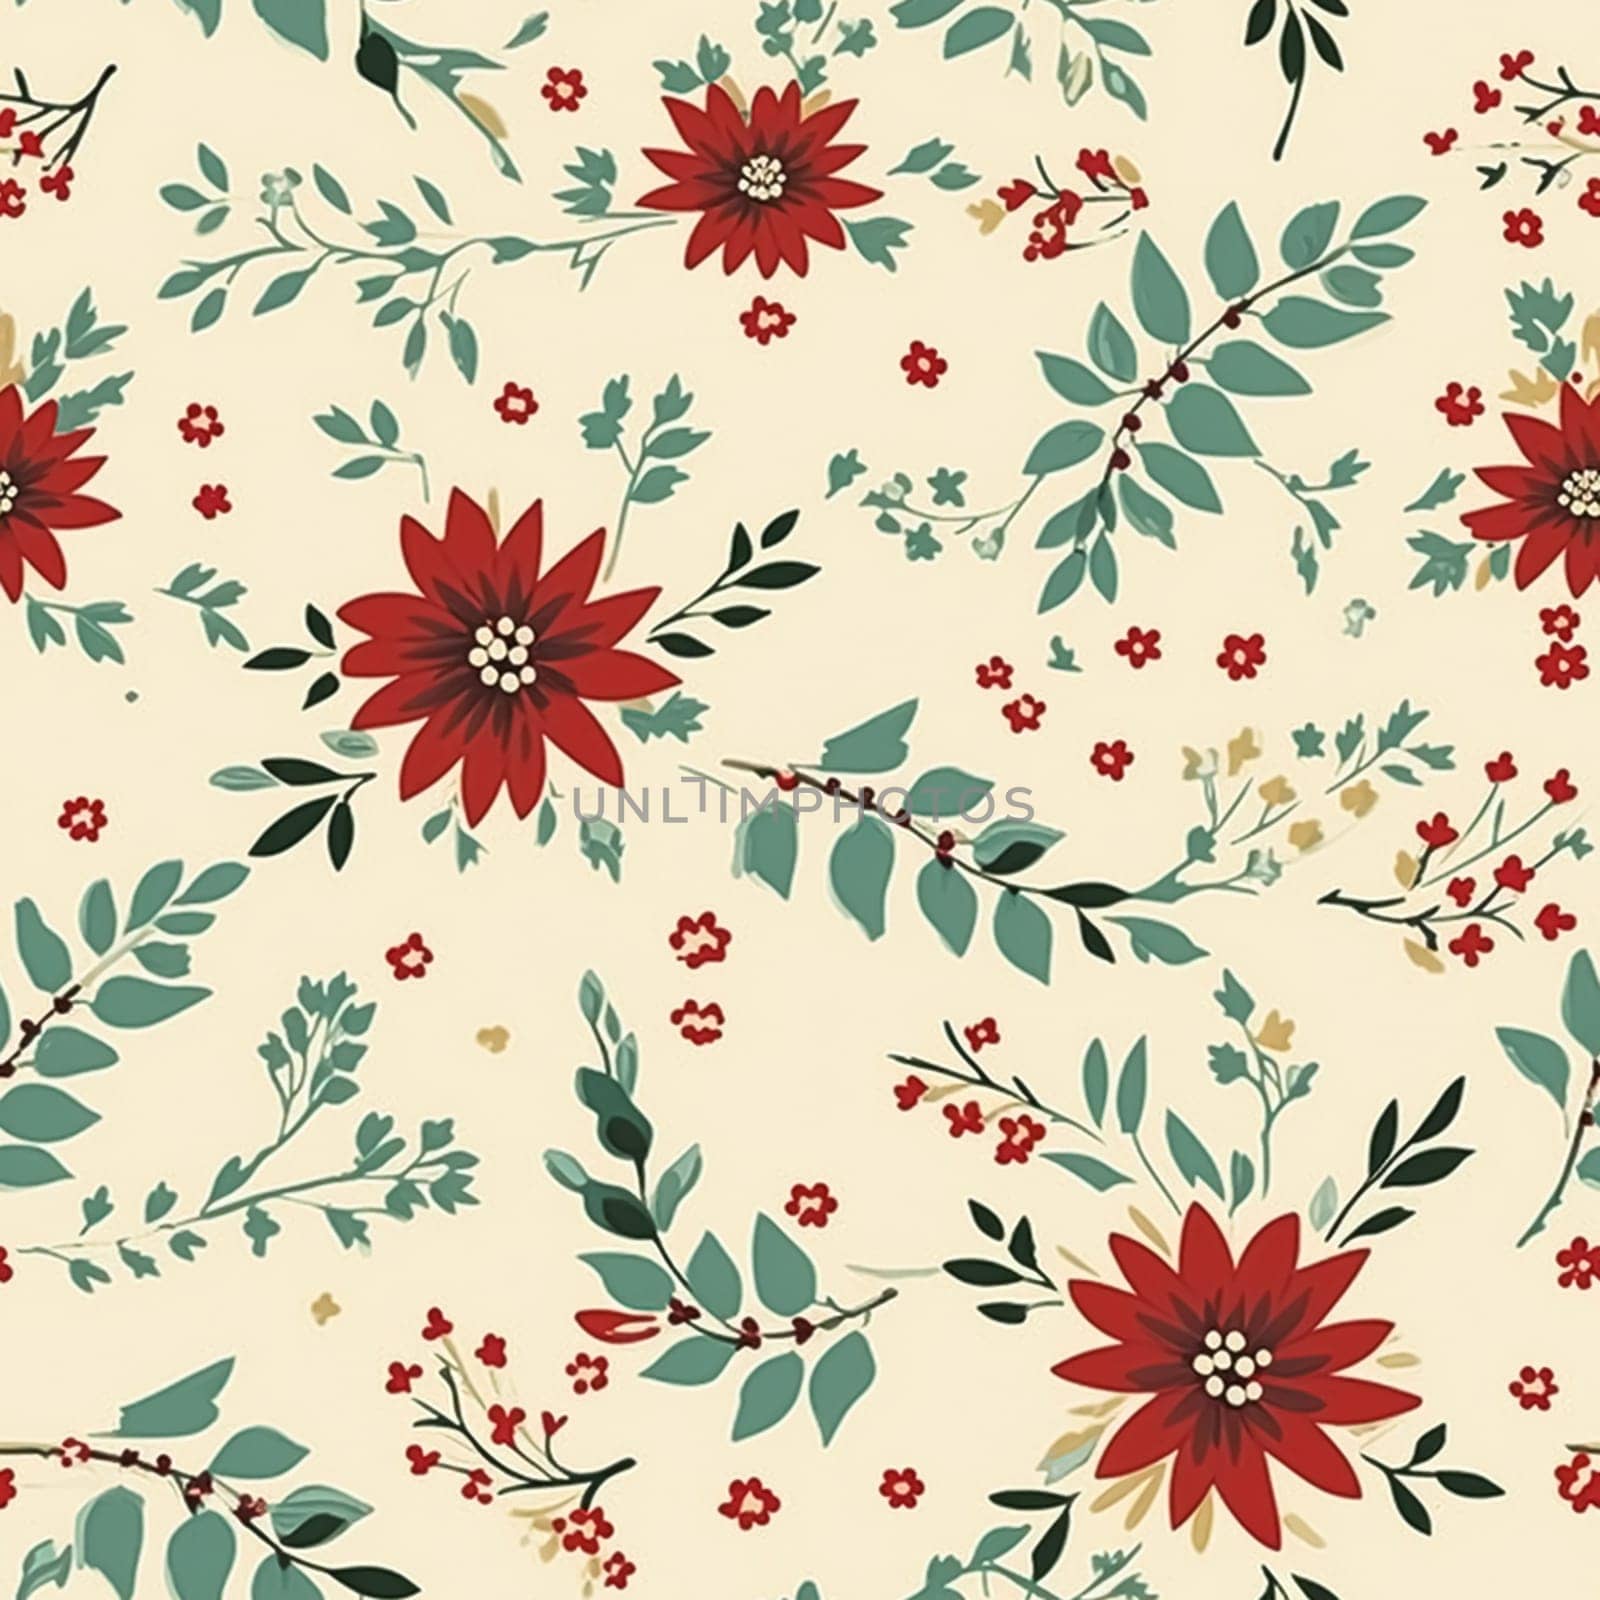 Seamless pattern, tileable vintage holiday botanical poinsettia Christmas country print for wallpaper, wrapping paper, scrapbook, fabric and product design by Anneleven